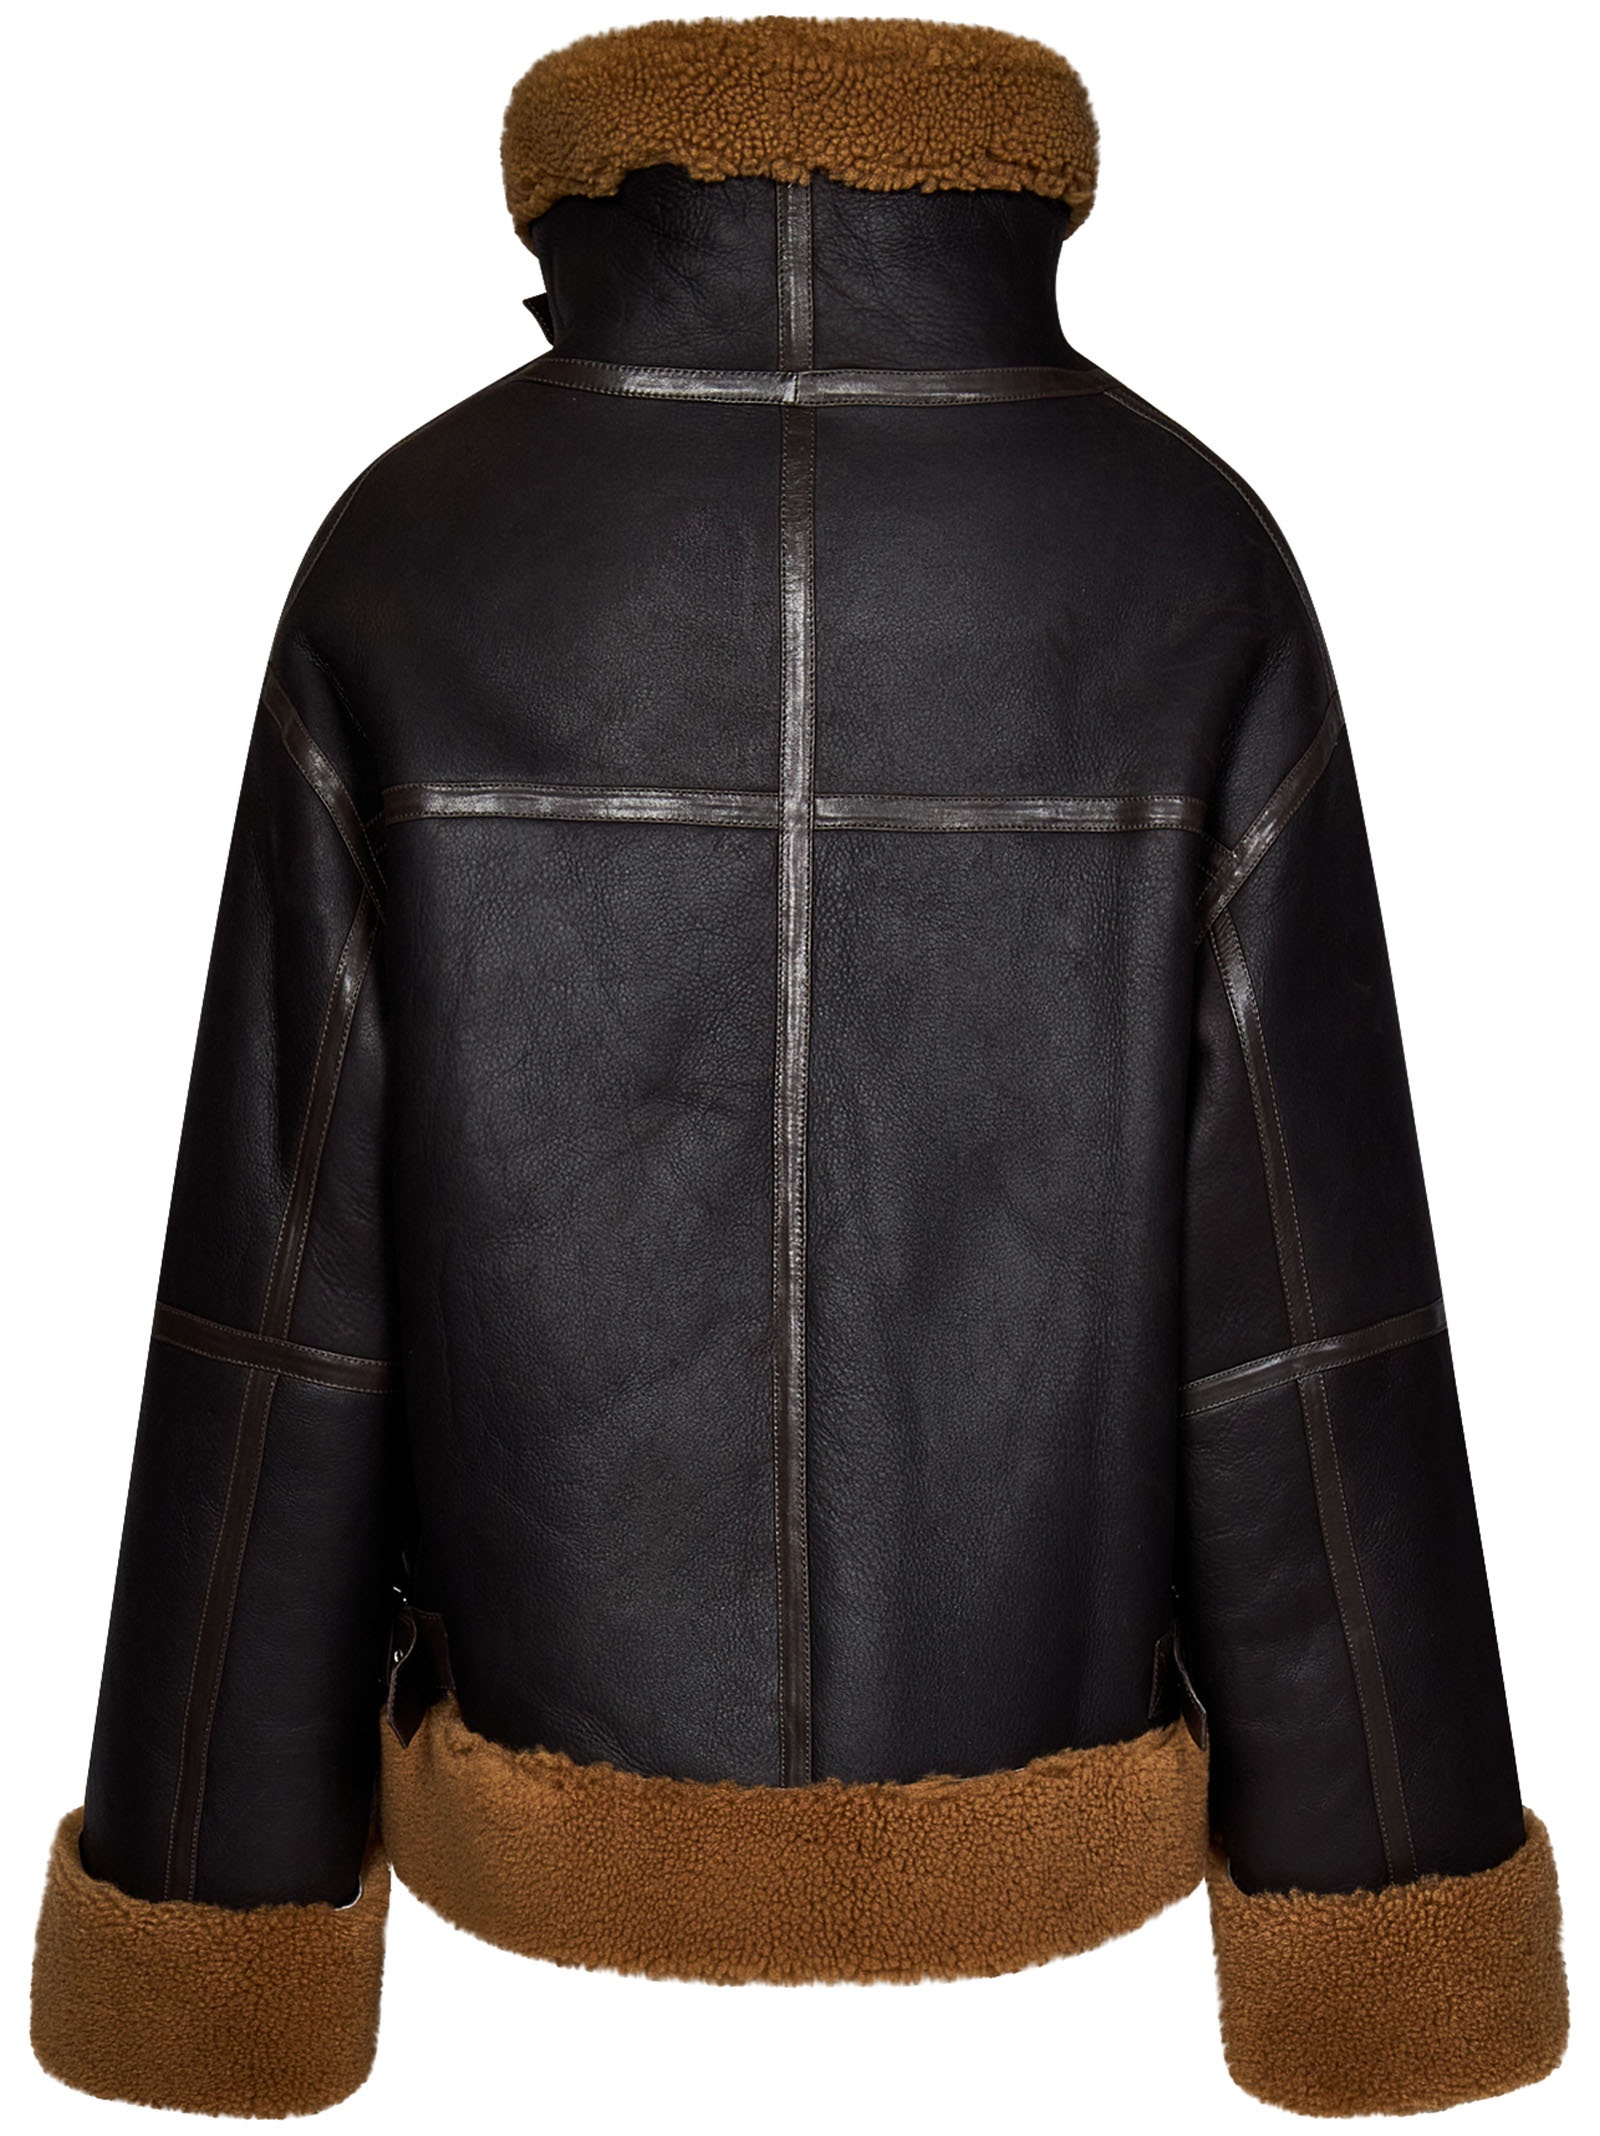 Dark brown leather jacket with brown shearling hem, collar and cuffs. - 2